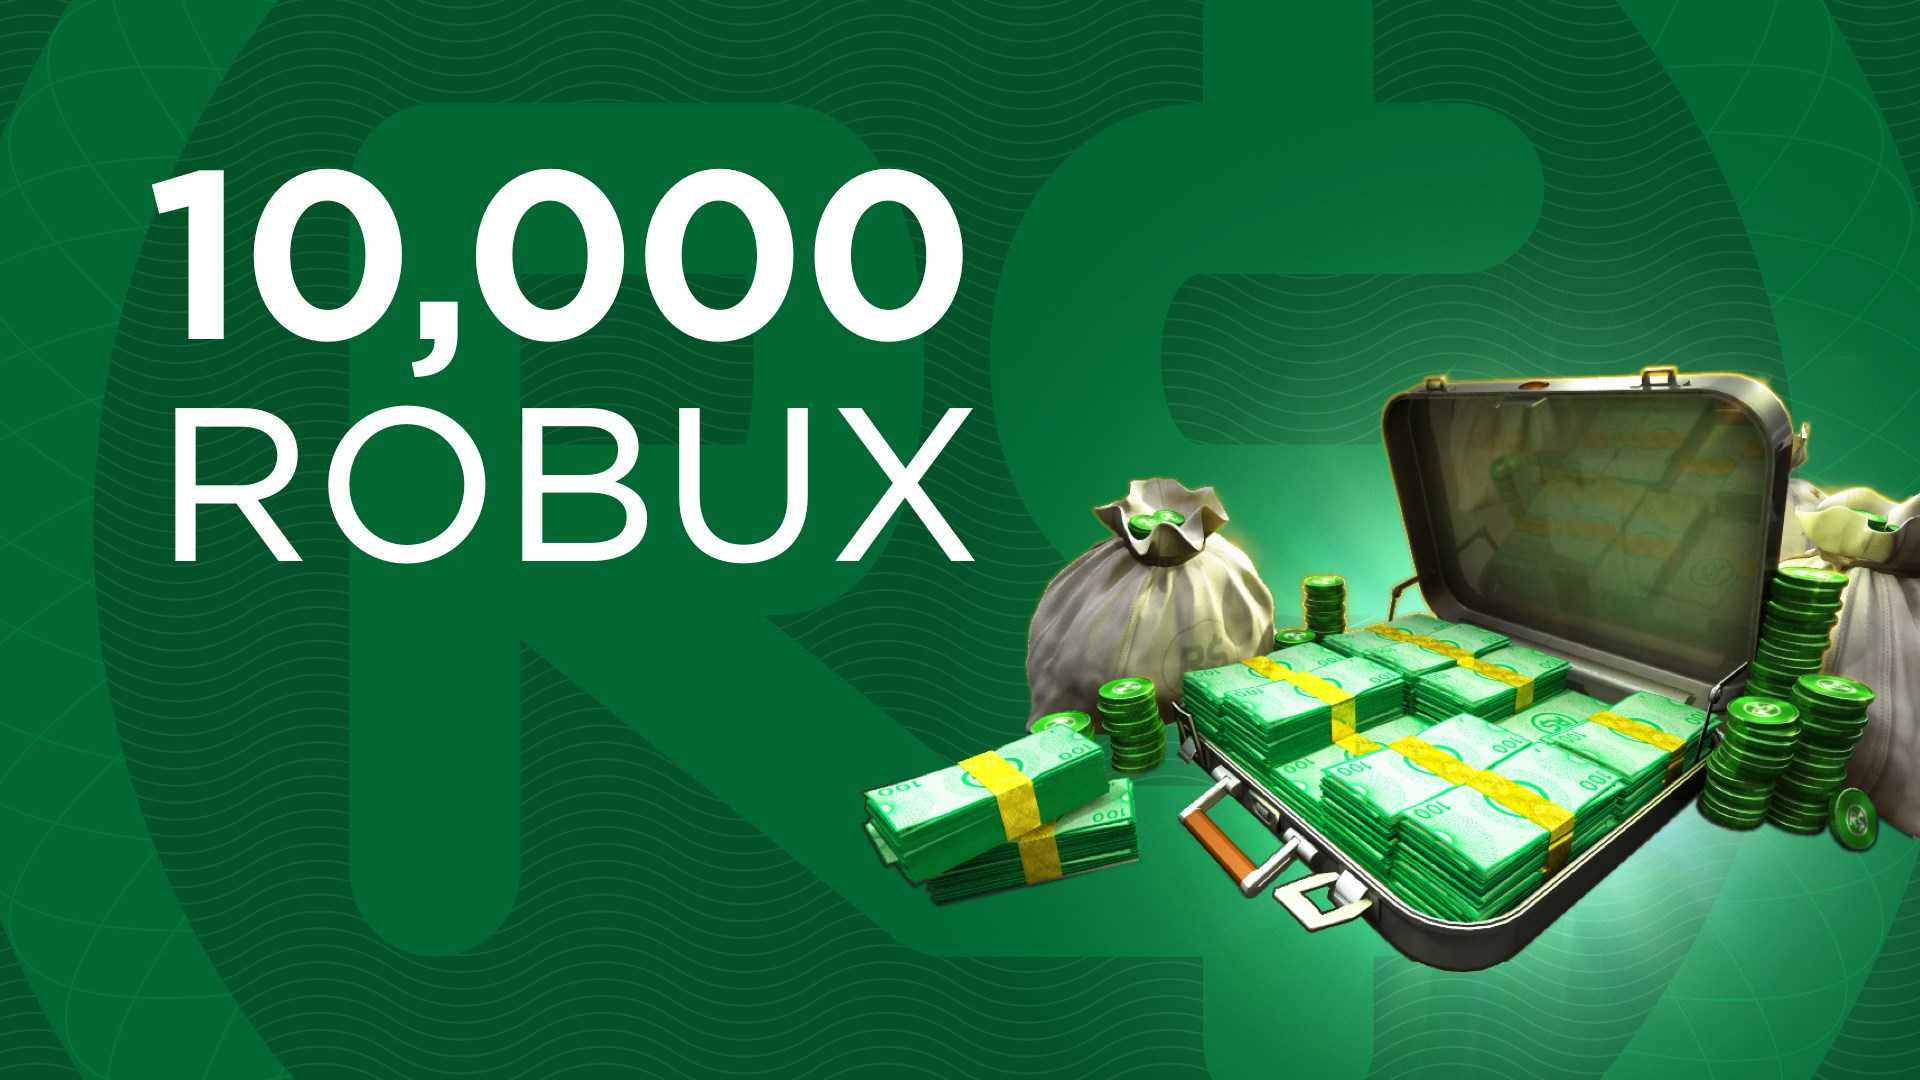 How Much Is 10,000 Robux?